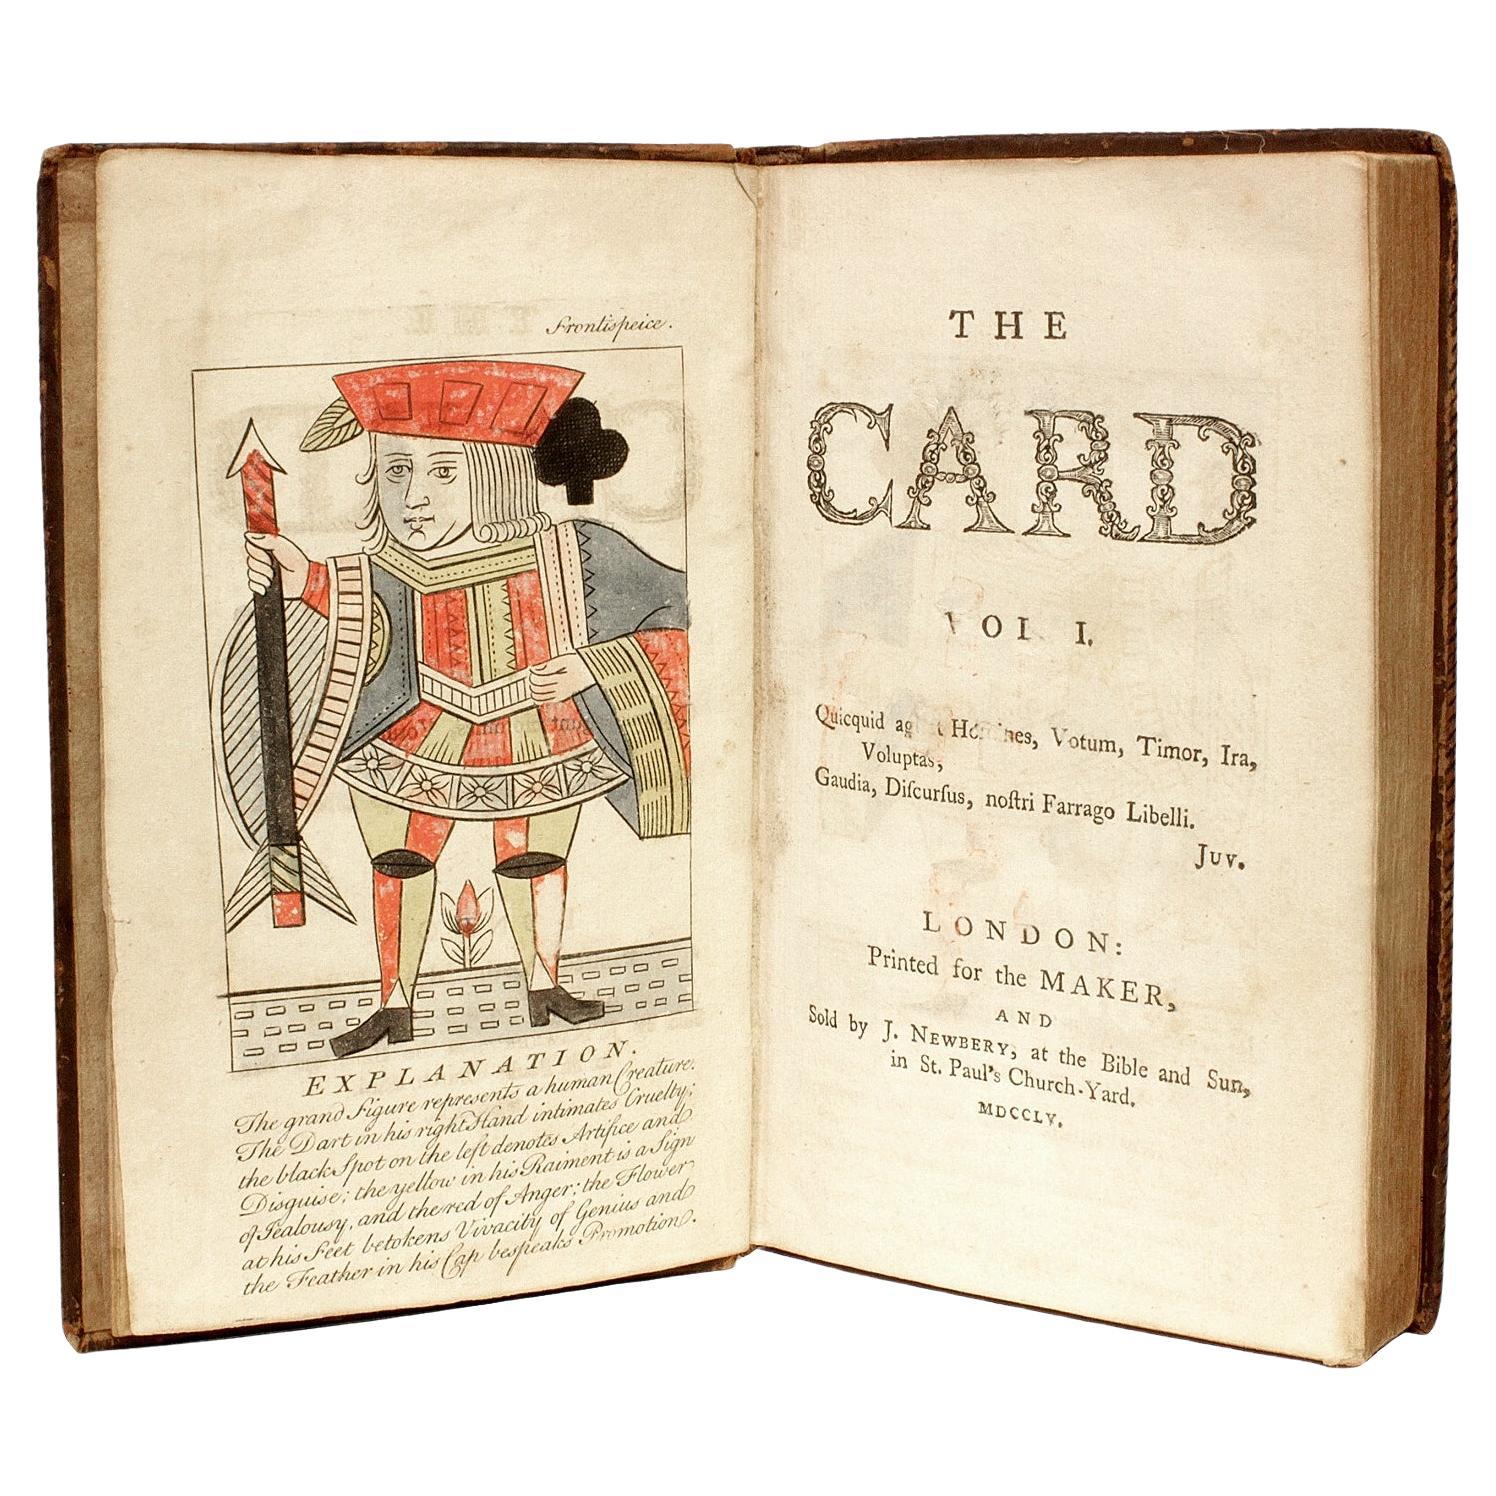 John Kidgell, the Card, 1755, First Ed, the Earliest Known Mention of Baseball